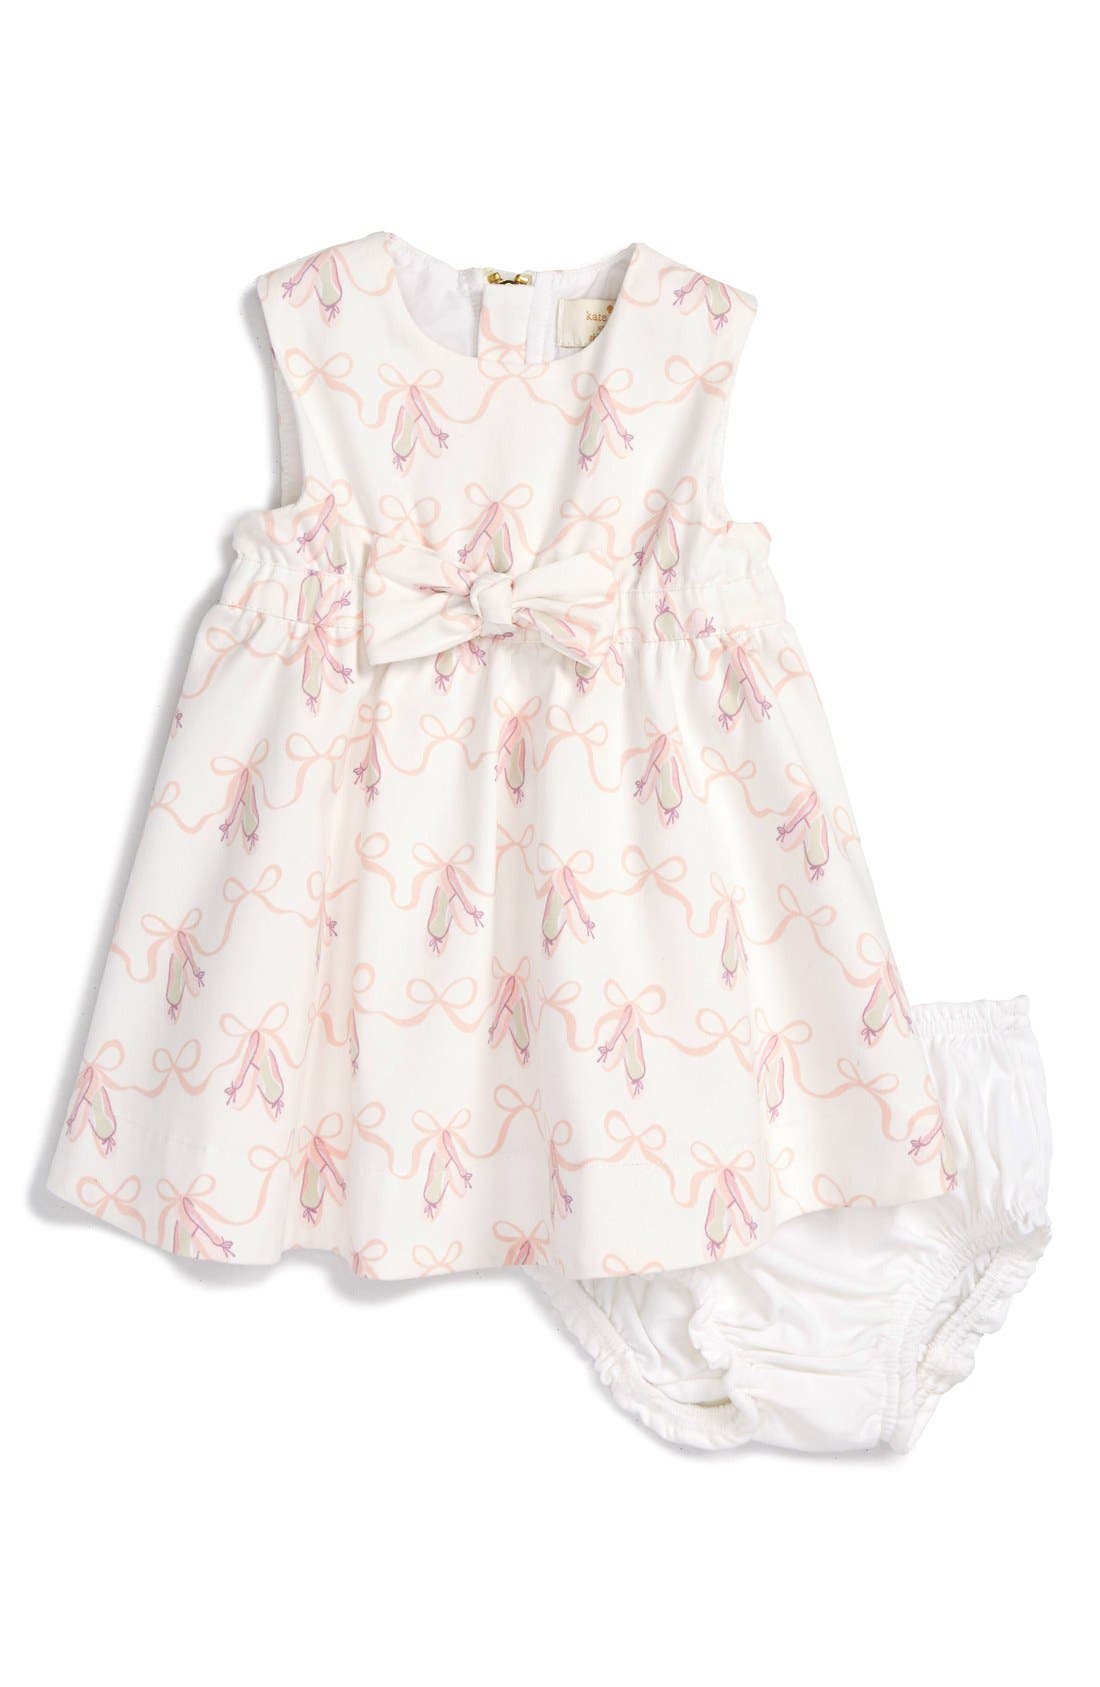 kate spade baby girl outfit